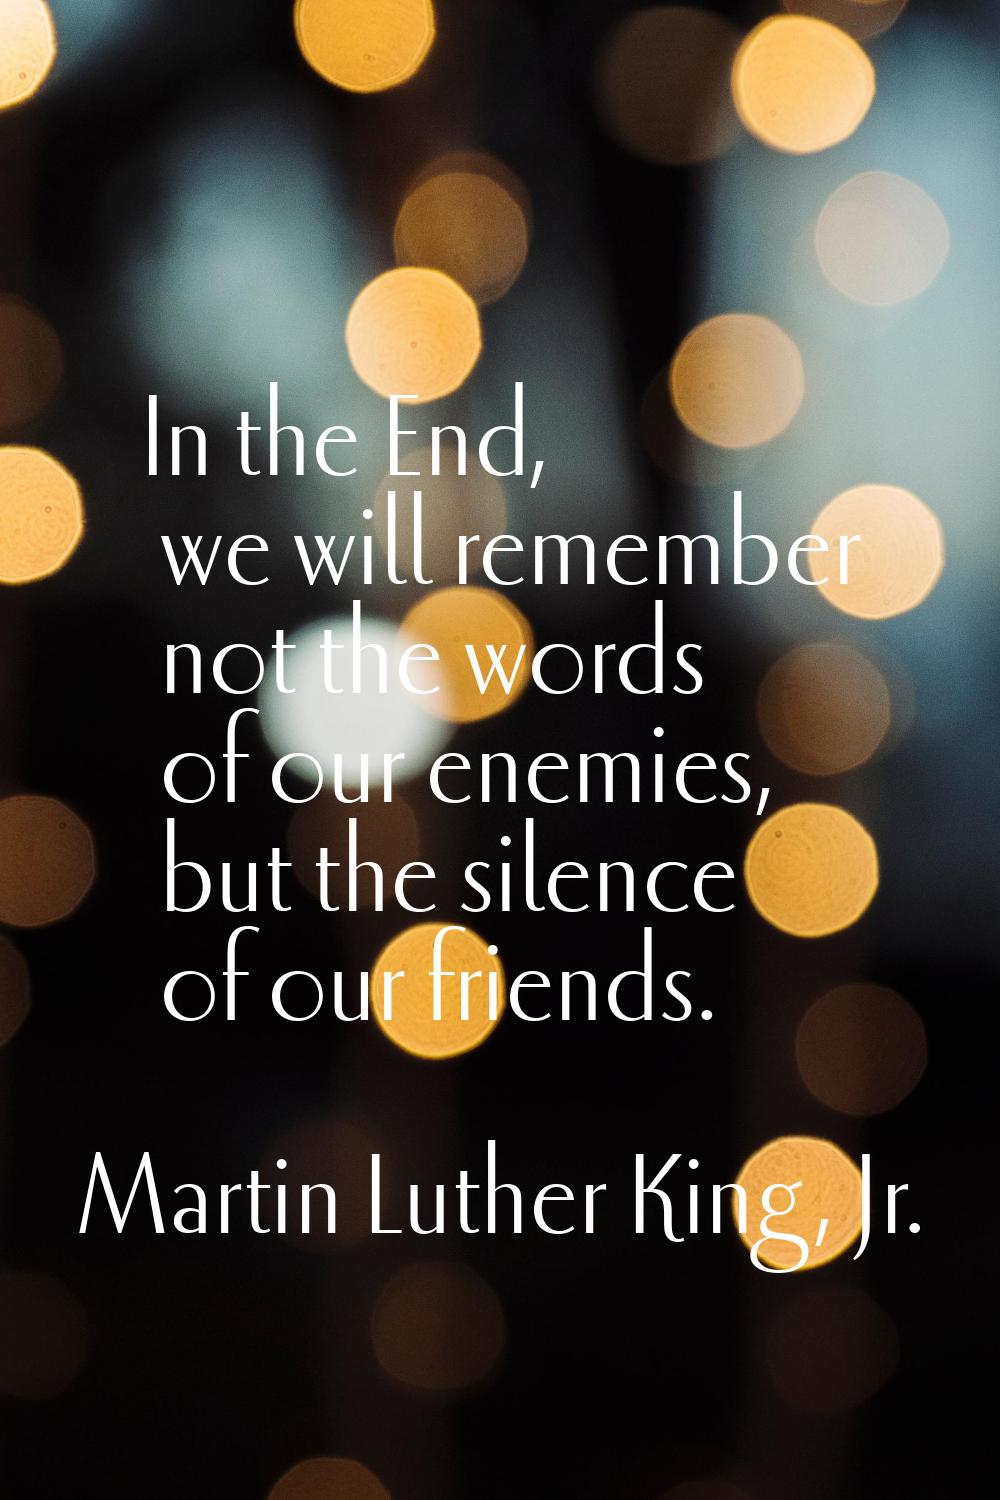 In the End, we will remember not the words of our enemies, but the silence of our friends.